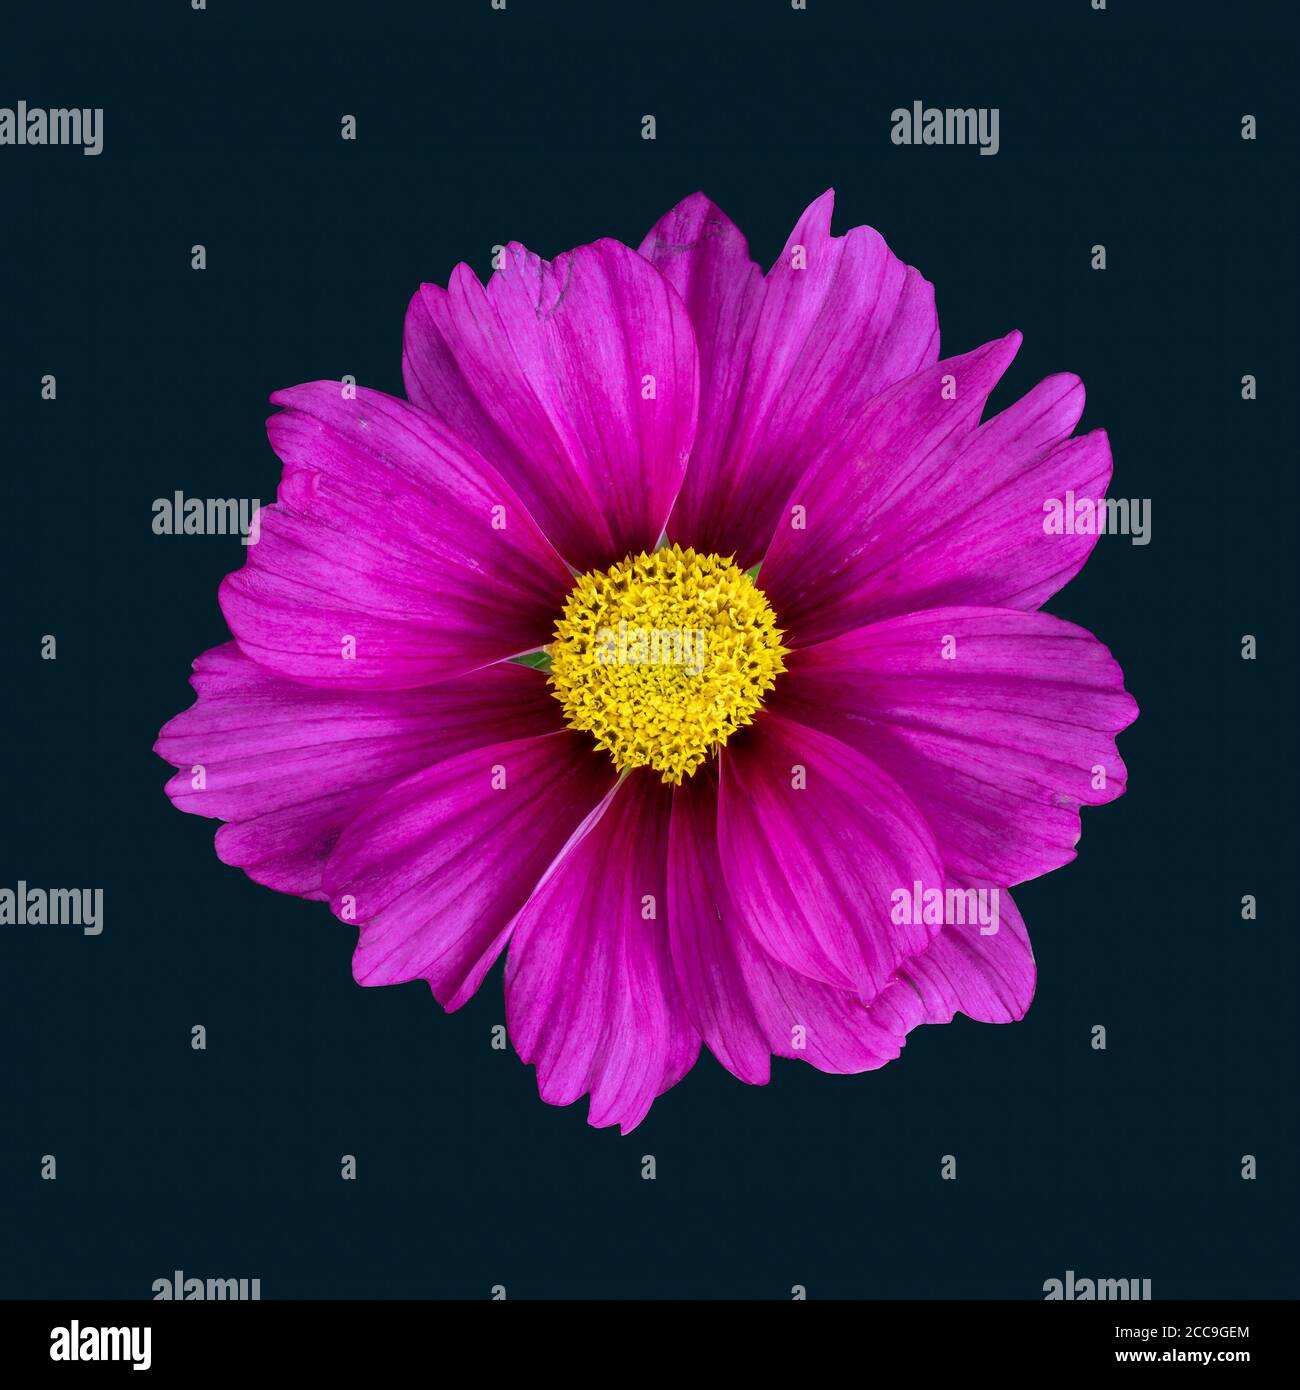 Color table top closeup of a single isolated wide open violet cosmos blossom on dark blue background Stock Photo